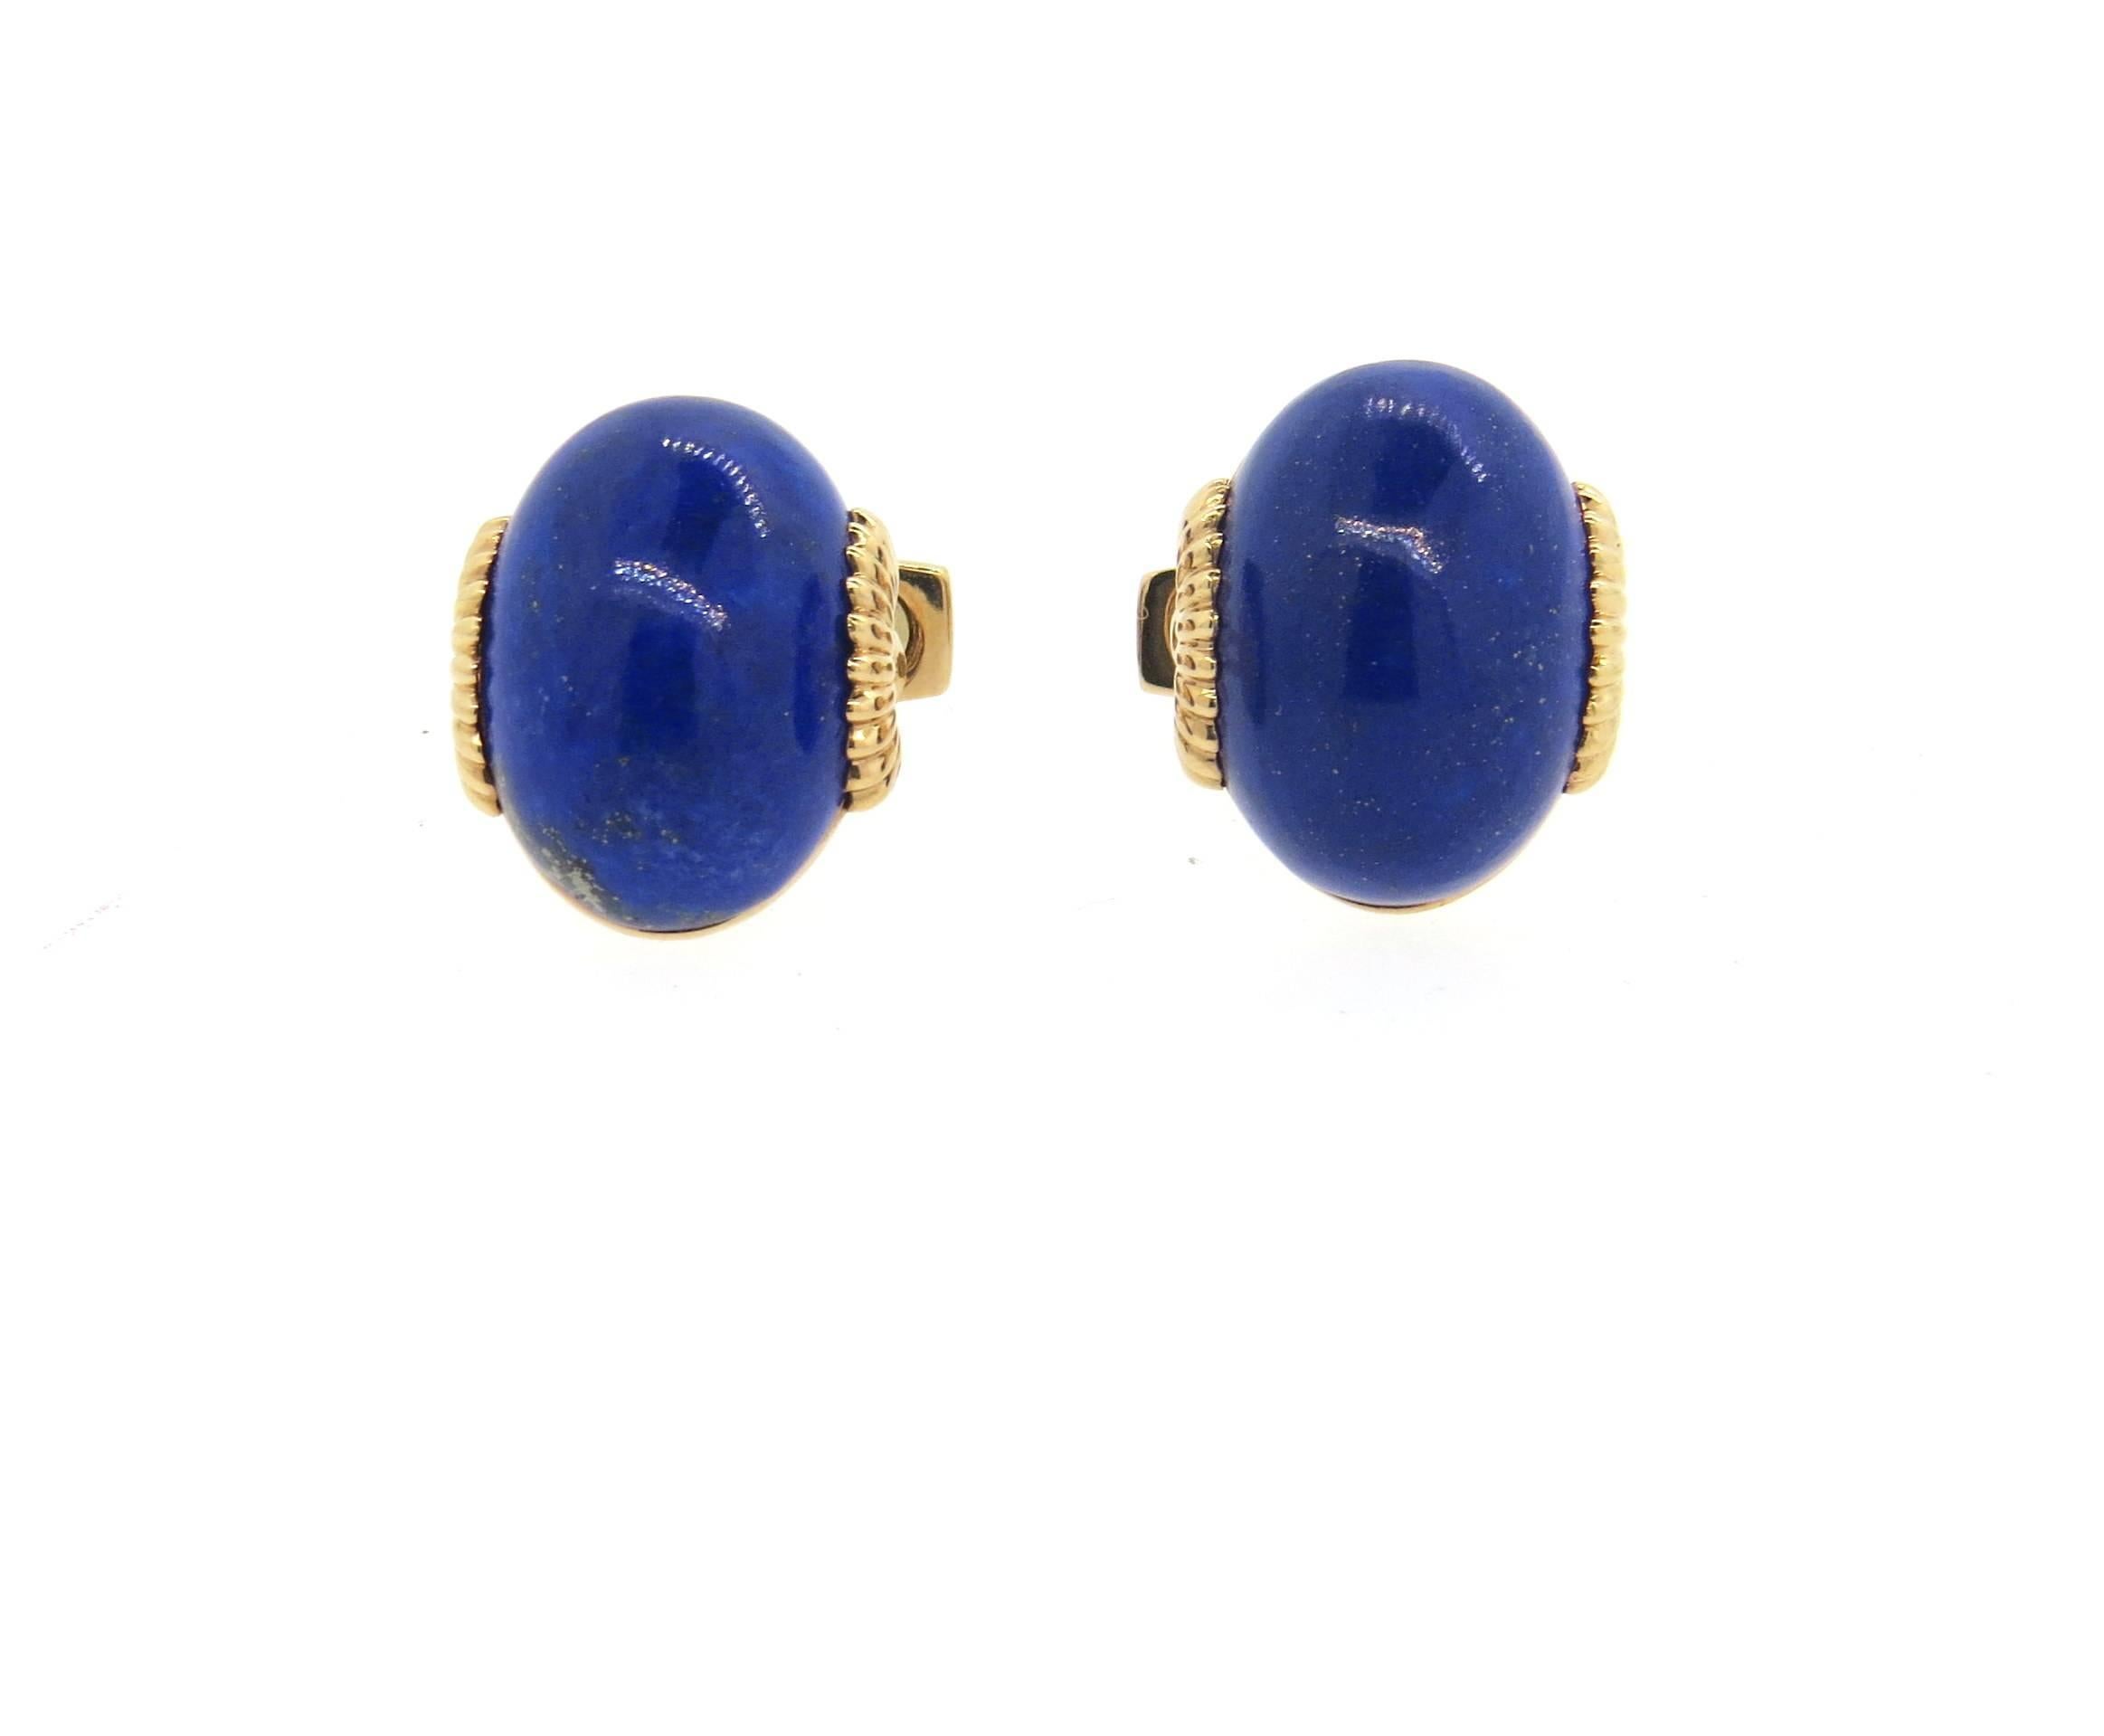 A pair of large 18k yellow gold cufflinks, crafted by Favero,set with lapis lazuli stones. Each top measures 18mm x 15mm. Marked Favero, 750VI,750. Weight - 16 grams 